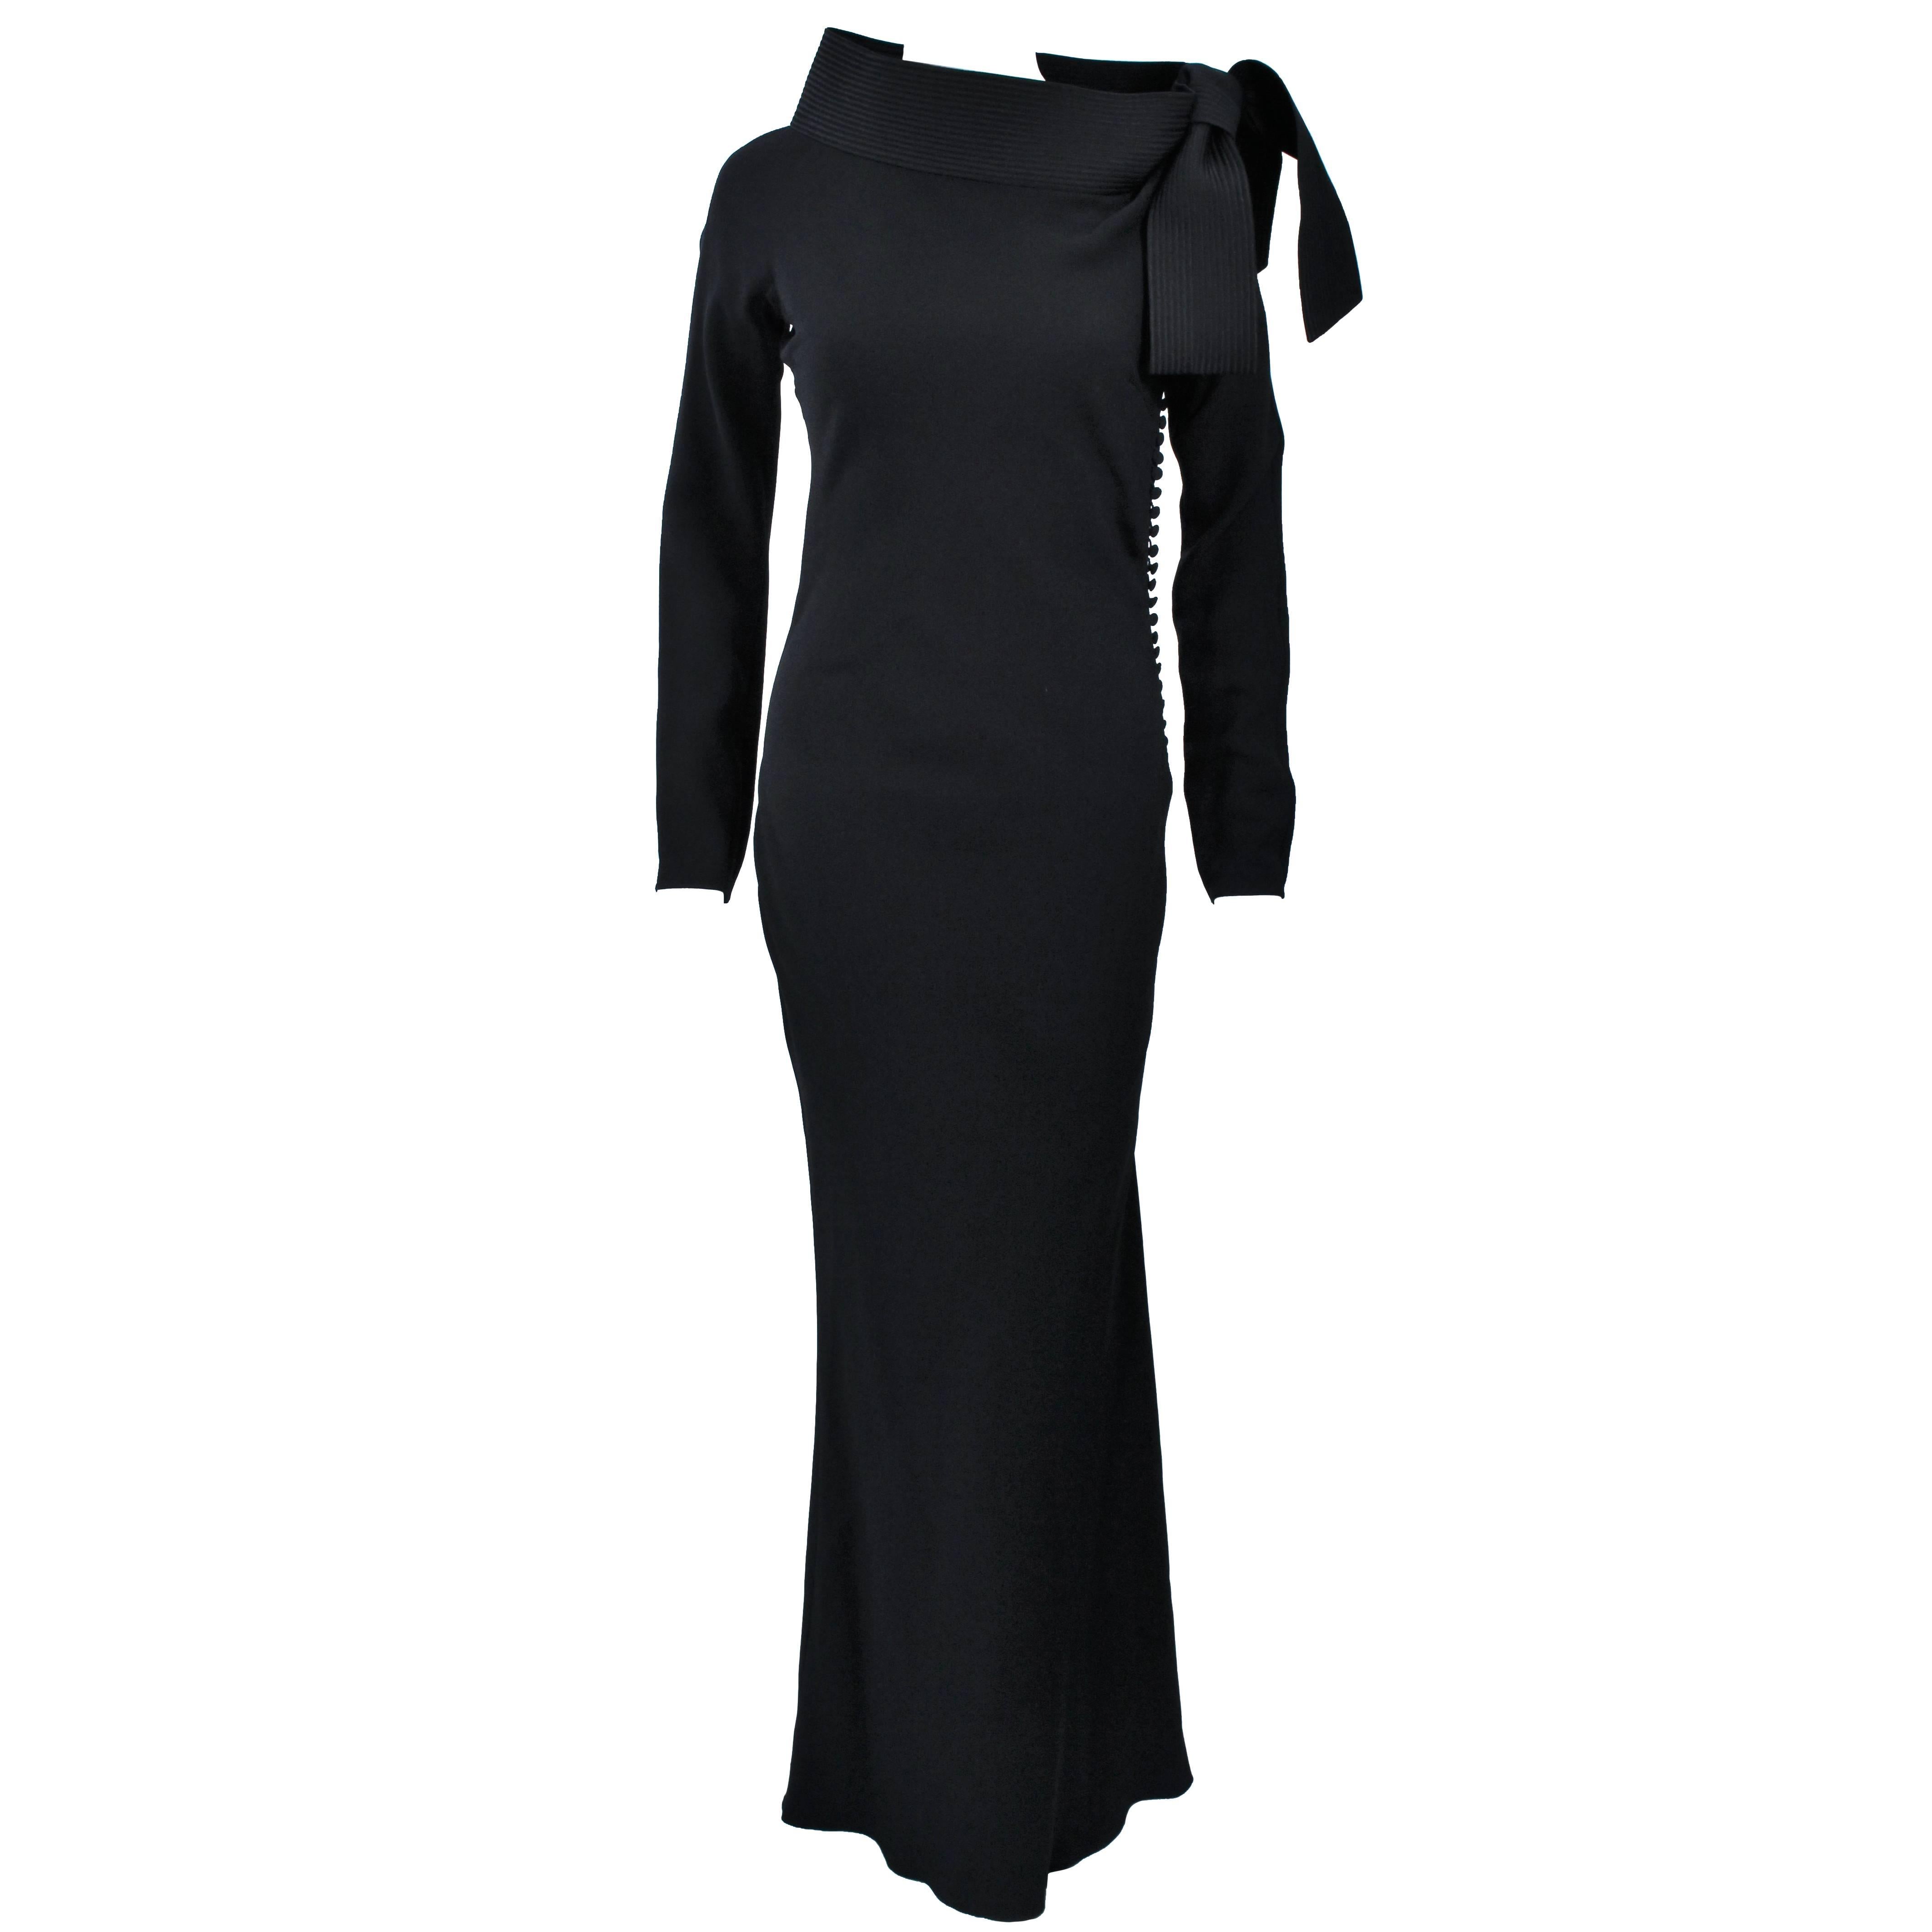 JOHN GALLIANO For CHRISTIAN DIOR Black Gown with Collar Detail Size 38 6